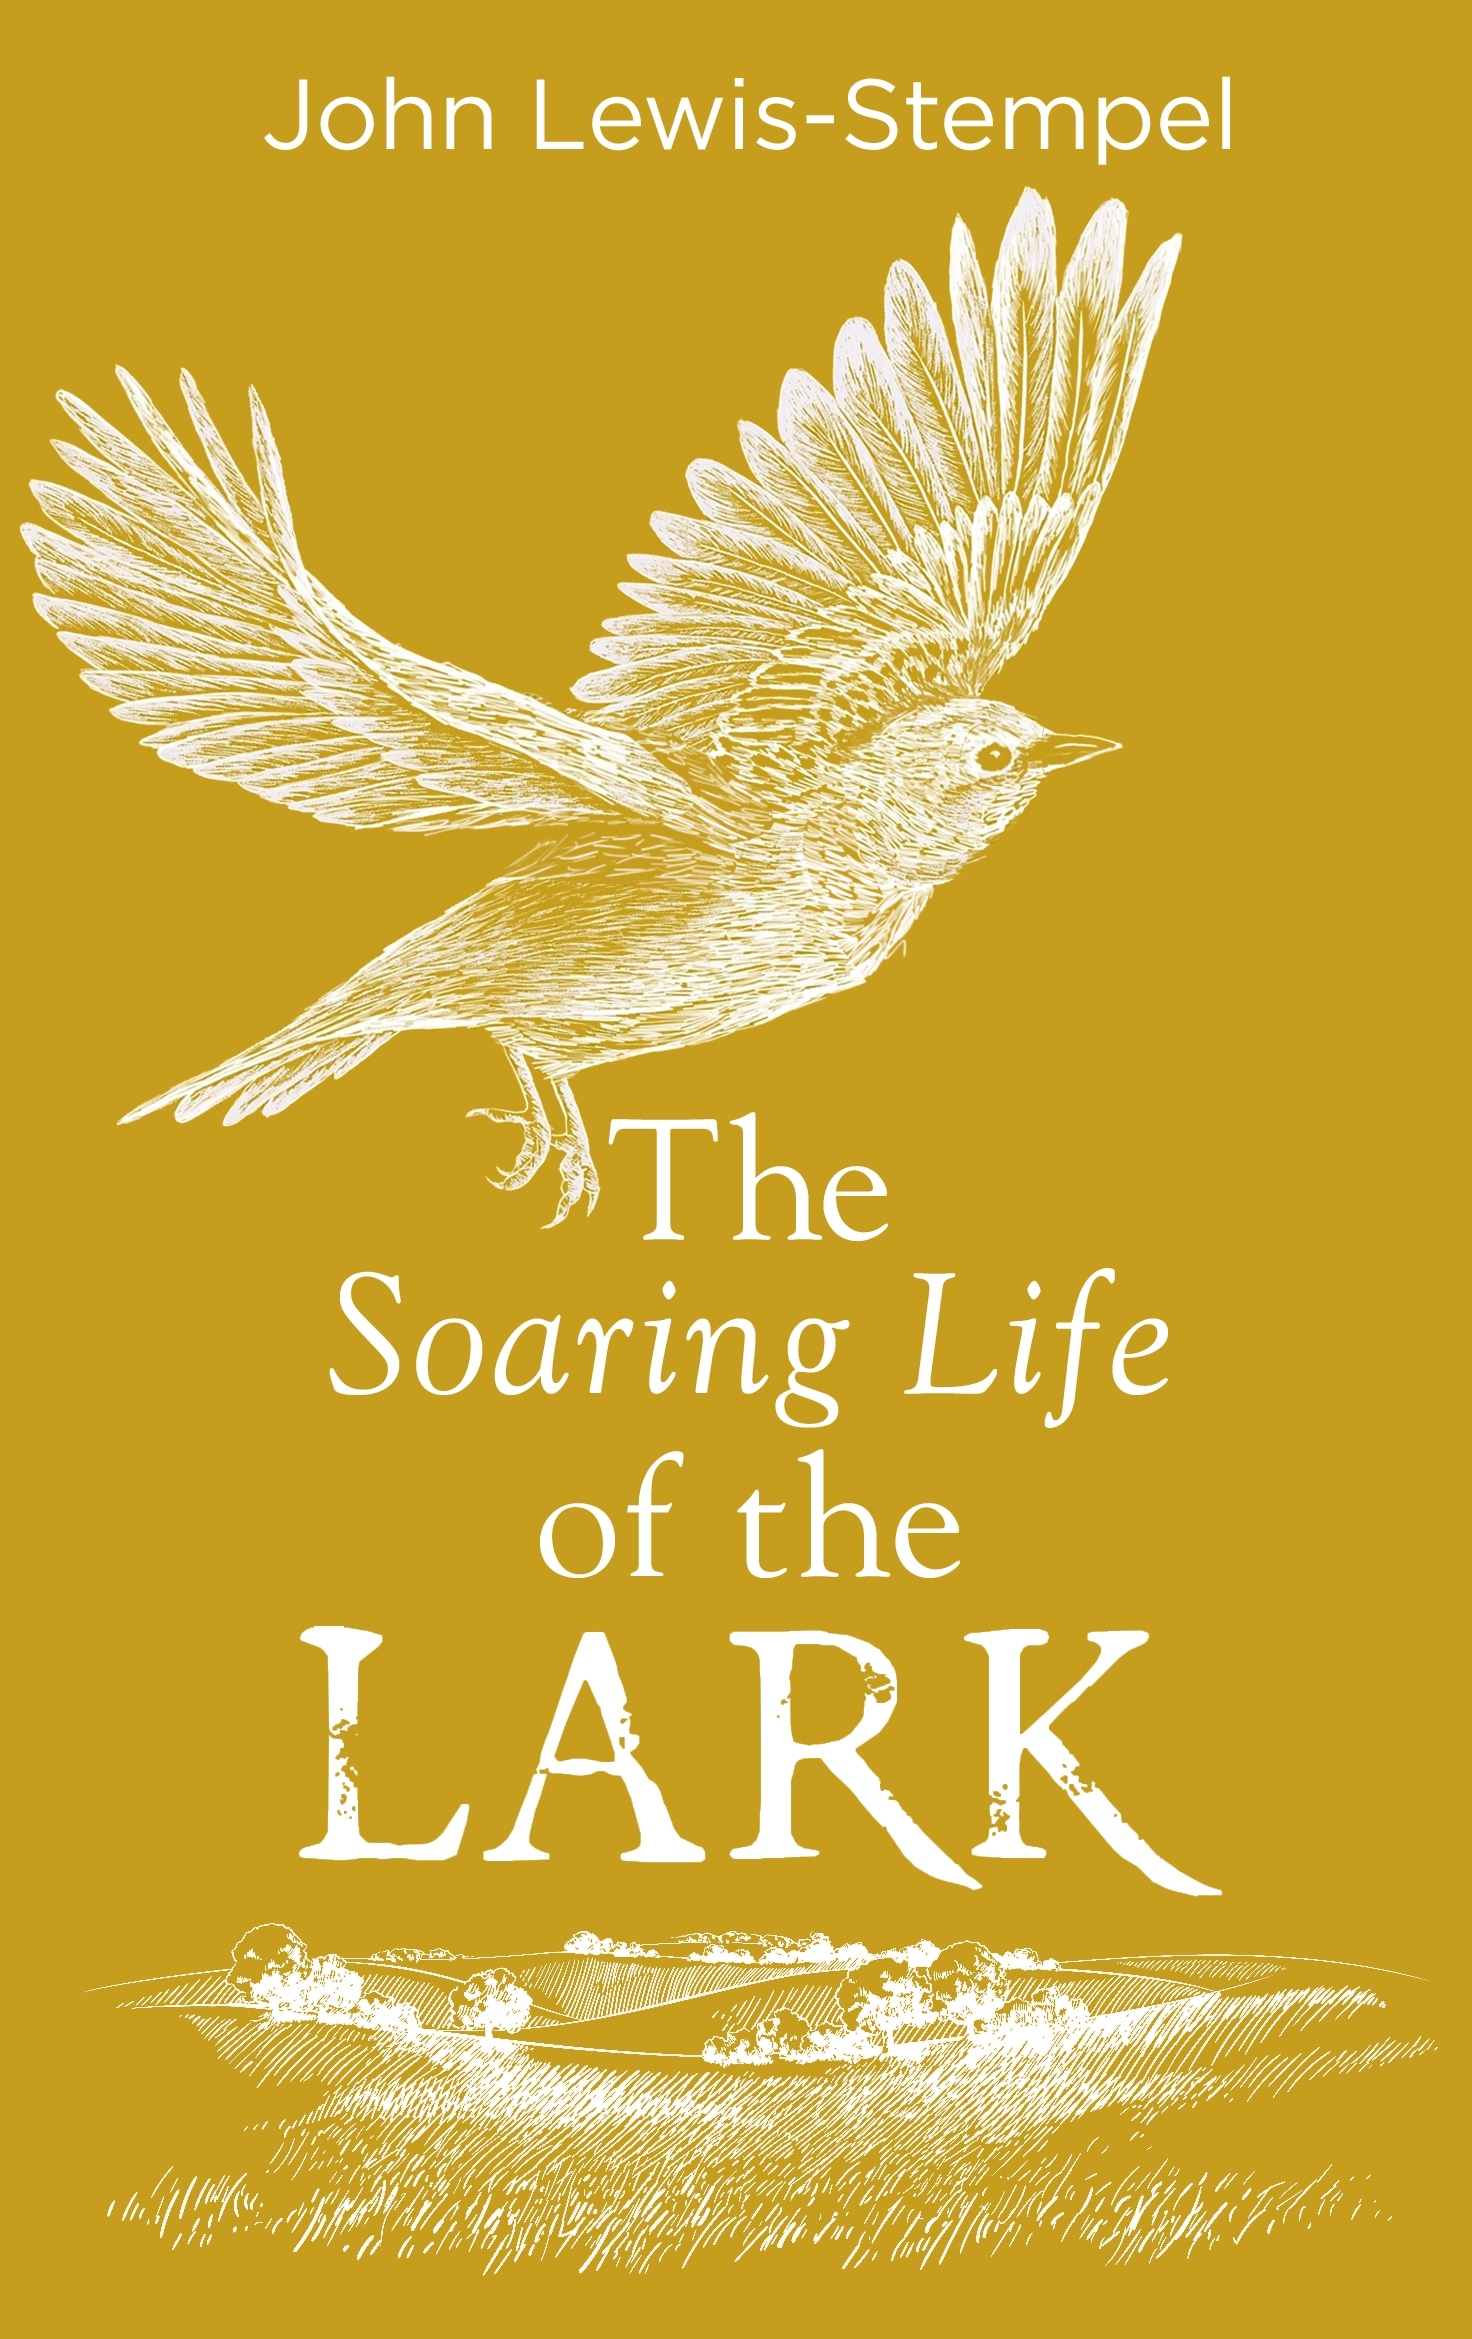 Book “The Soaring Life of the Lark” by John Lewis-Stempel — October 7, 2021